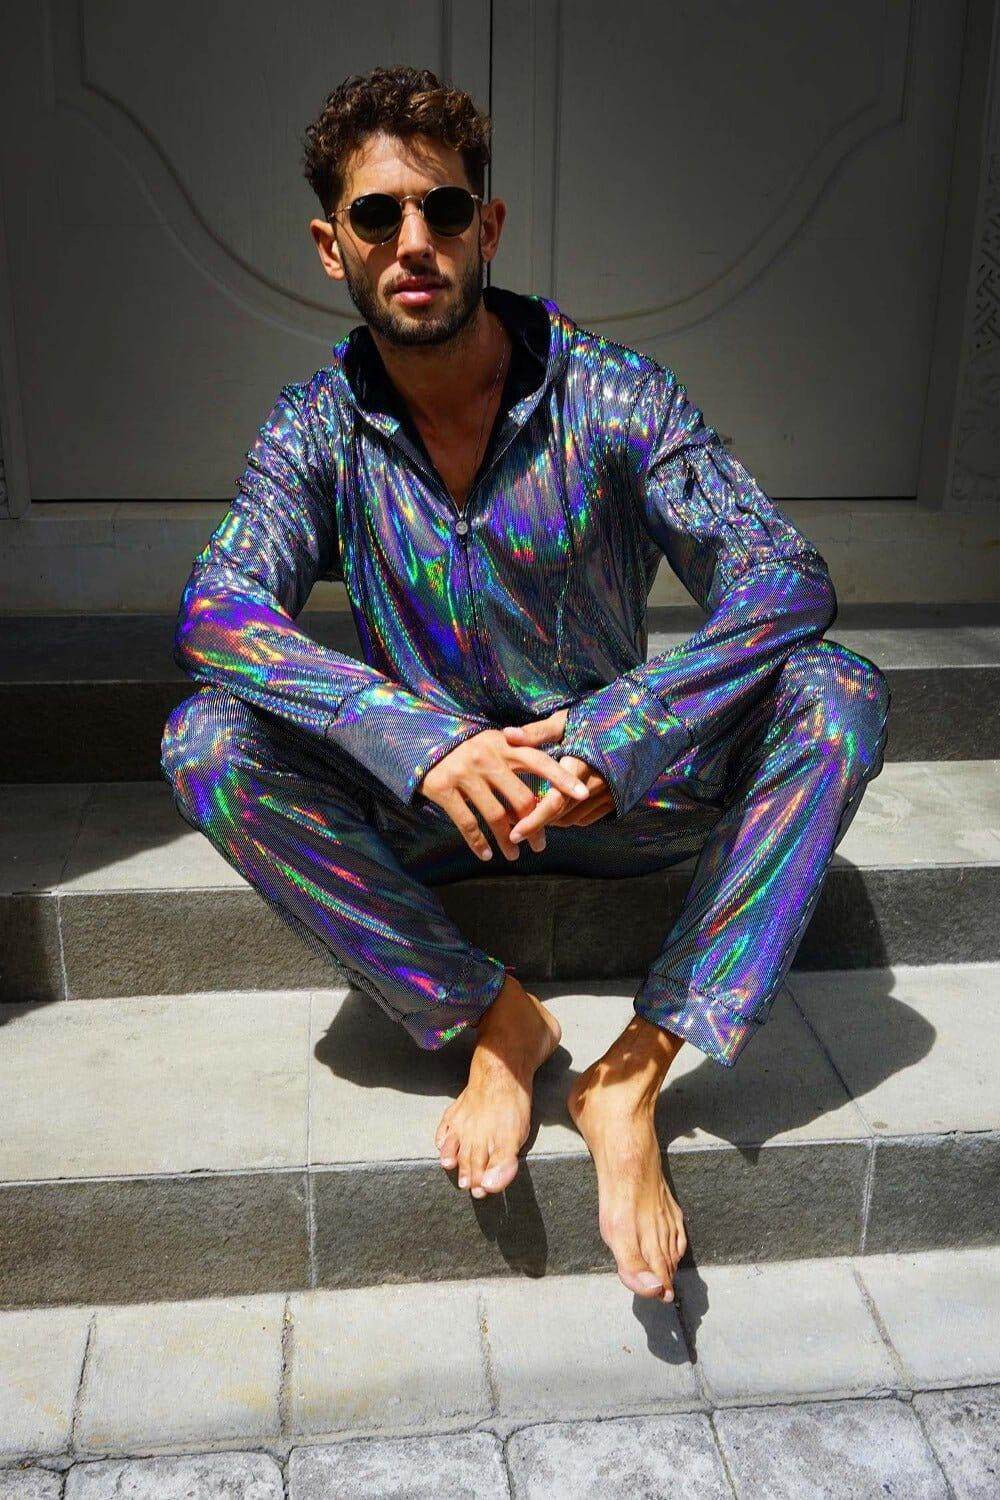 Holographic Velvet Adult Male Onesie with hood by Love Khaos for Festival wear, lounge wear and Mens Rave Clothing